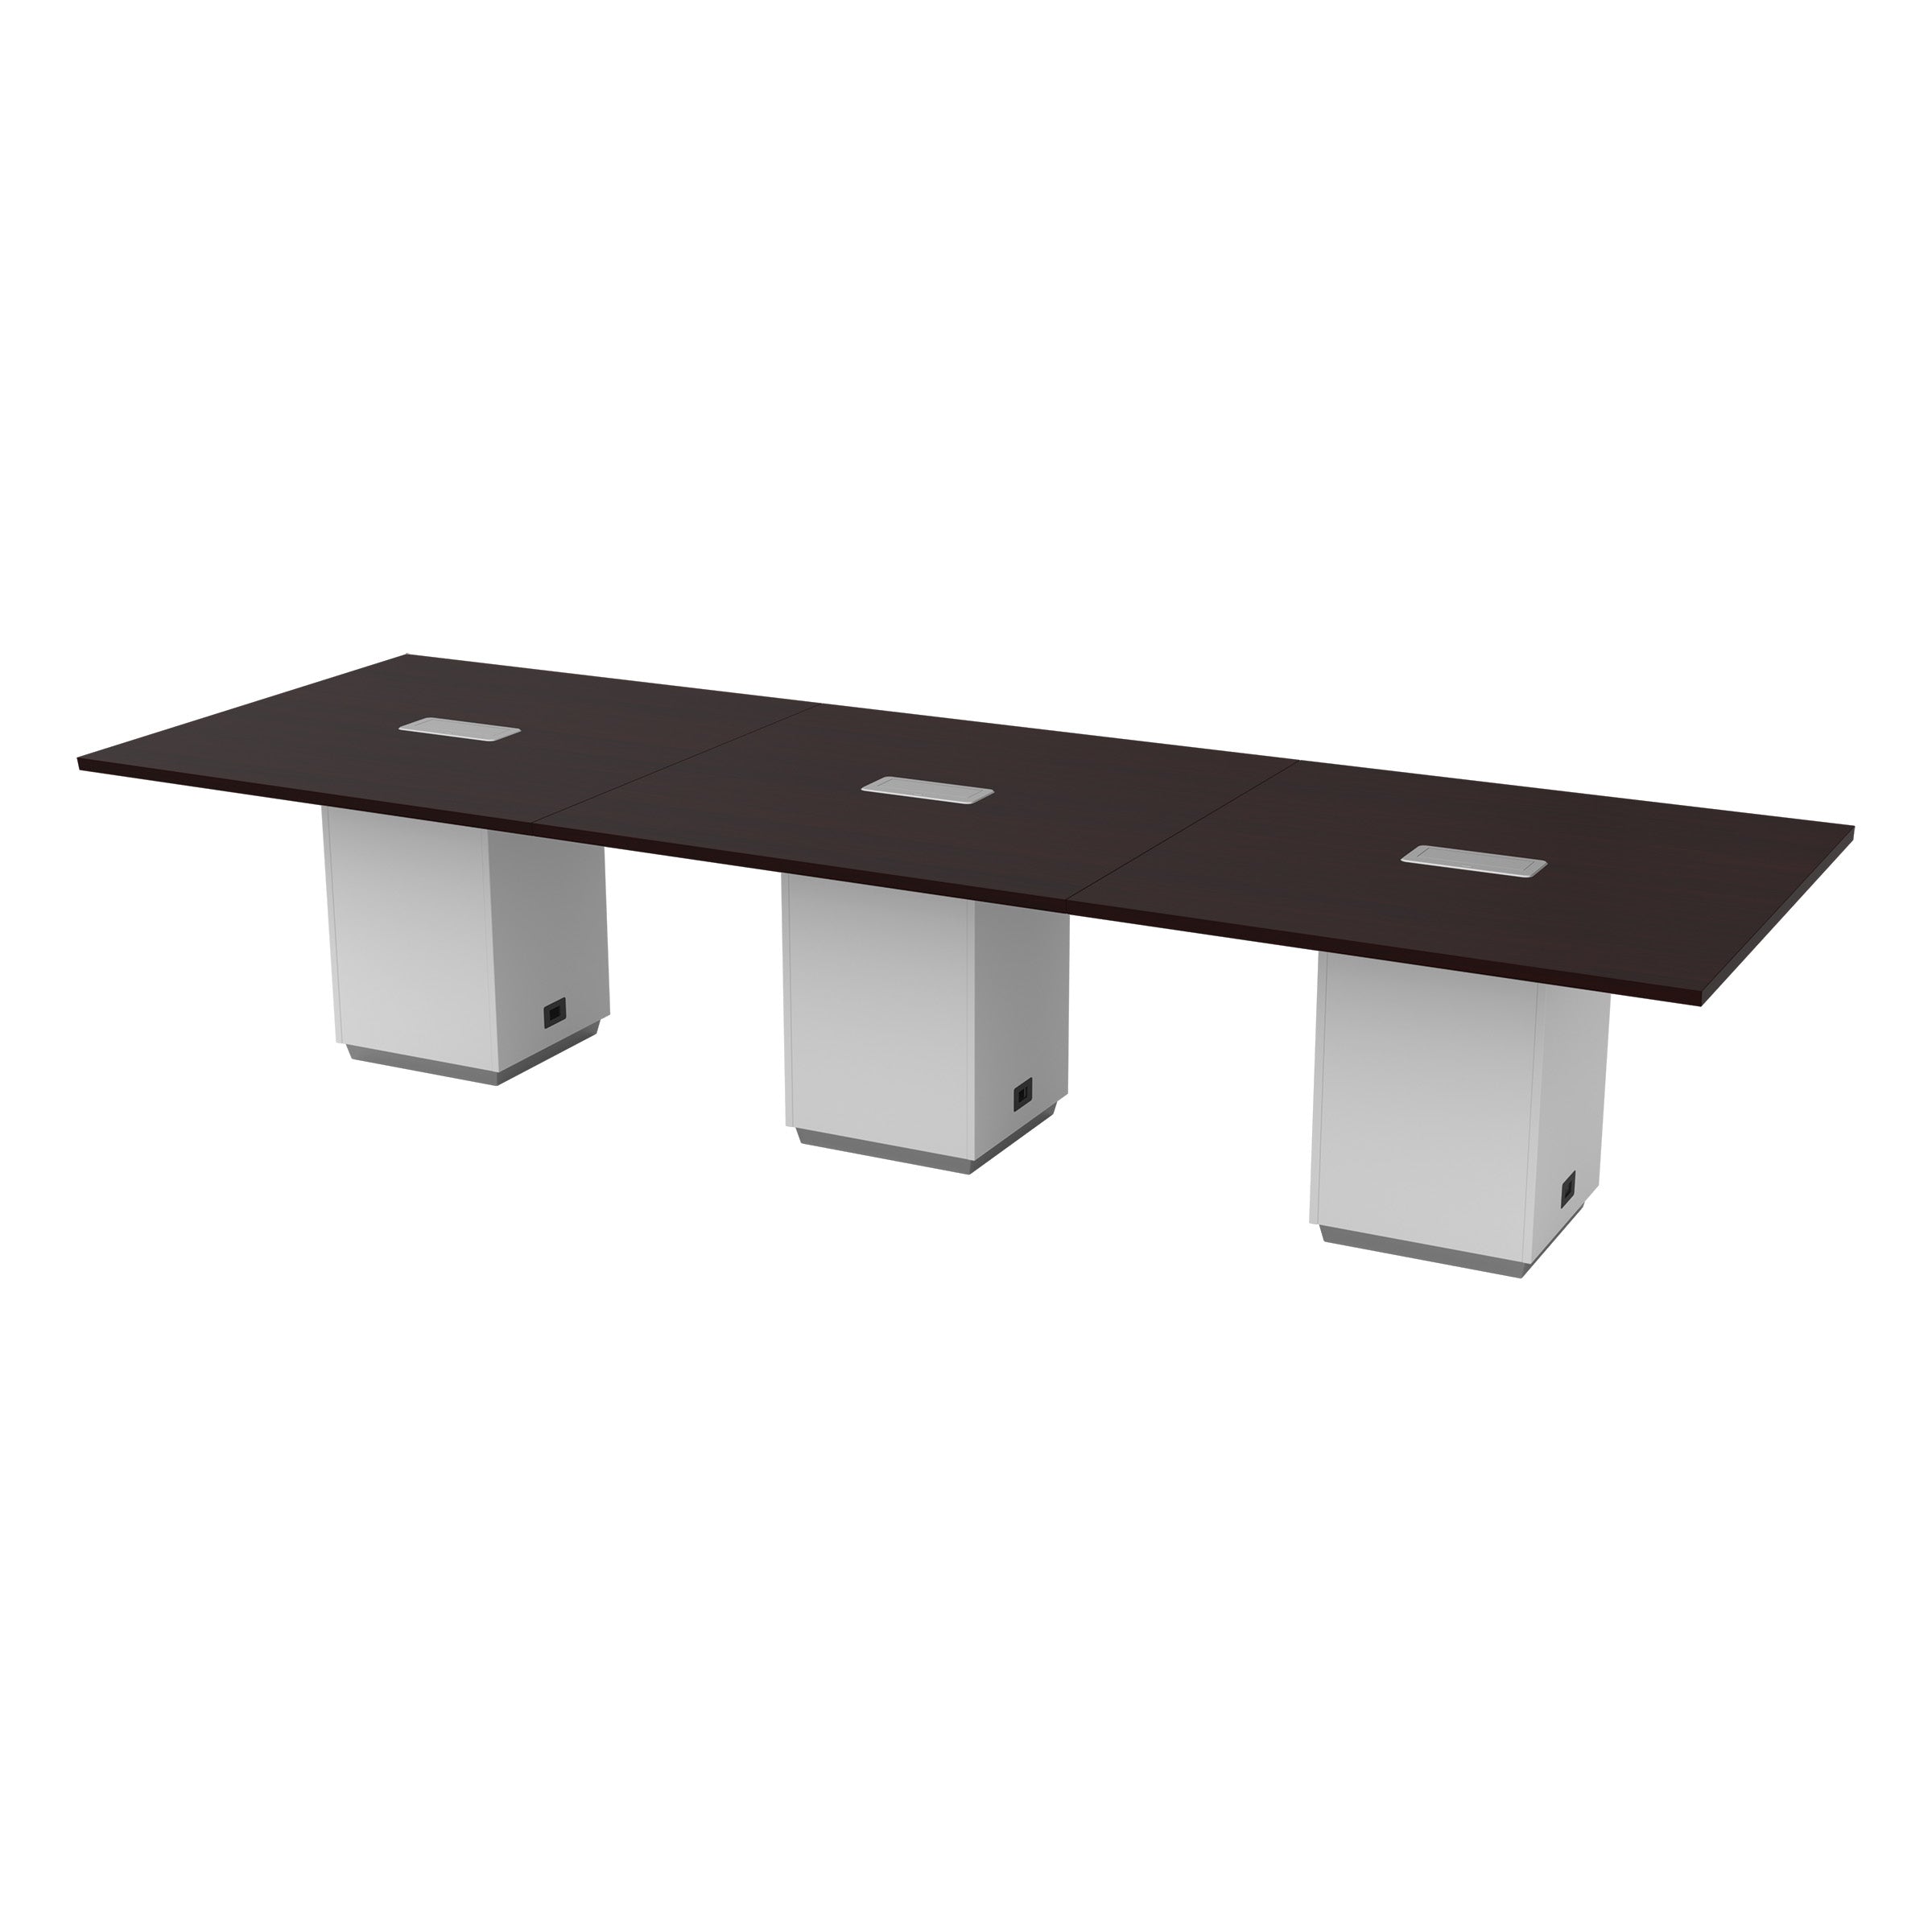 TUX-62 - Tuxedo 12' Conference Table by OSP